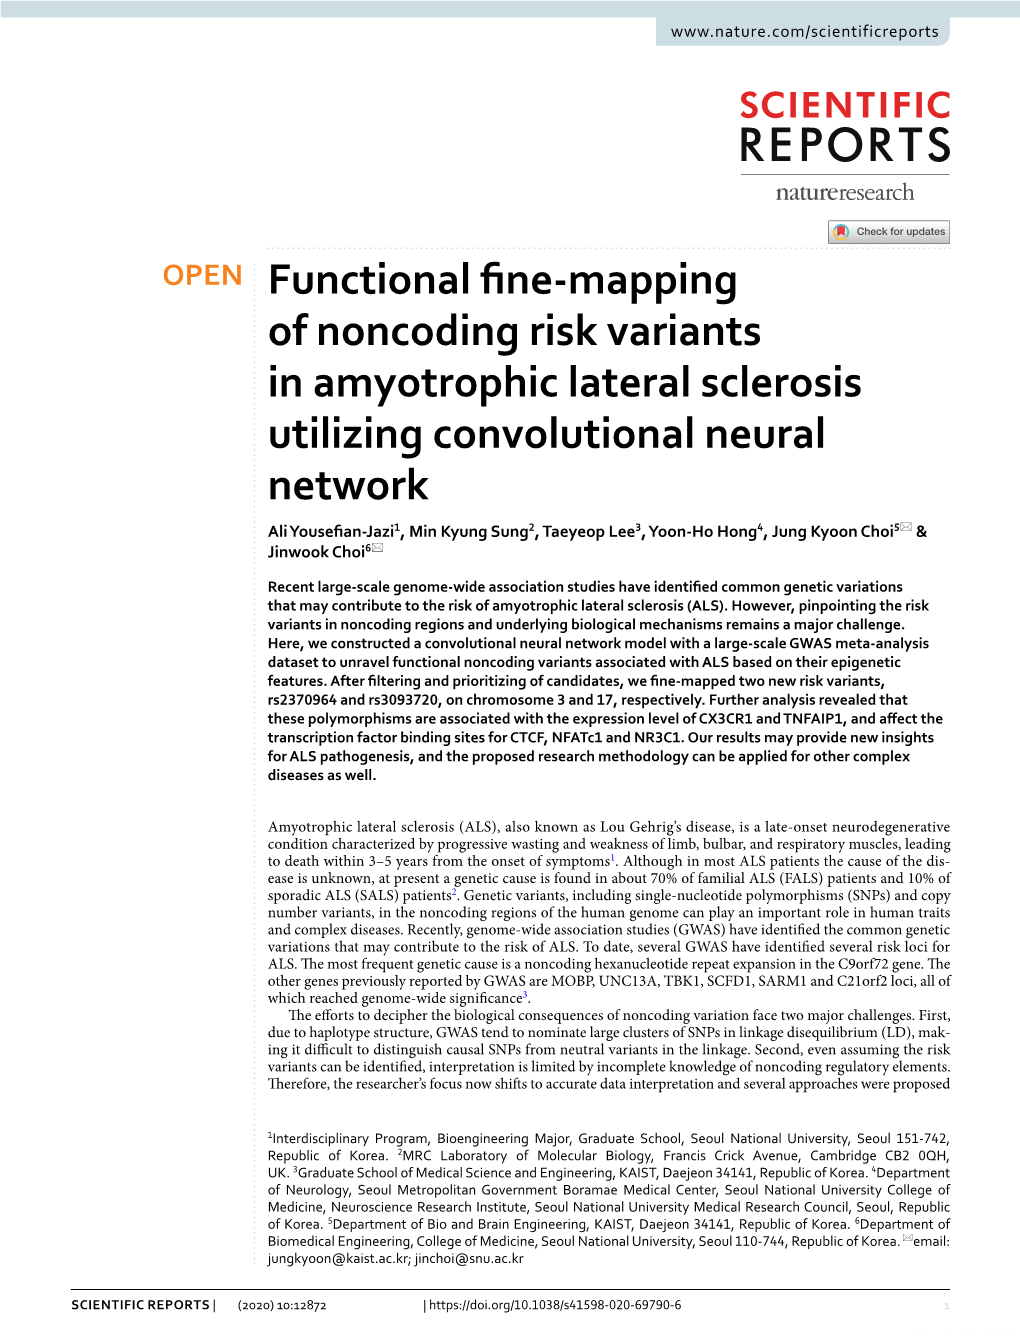 Functional Fine-Mapping of Noncoding Risk Variants in Amyotrophic Lateral